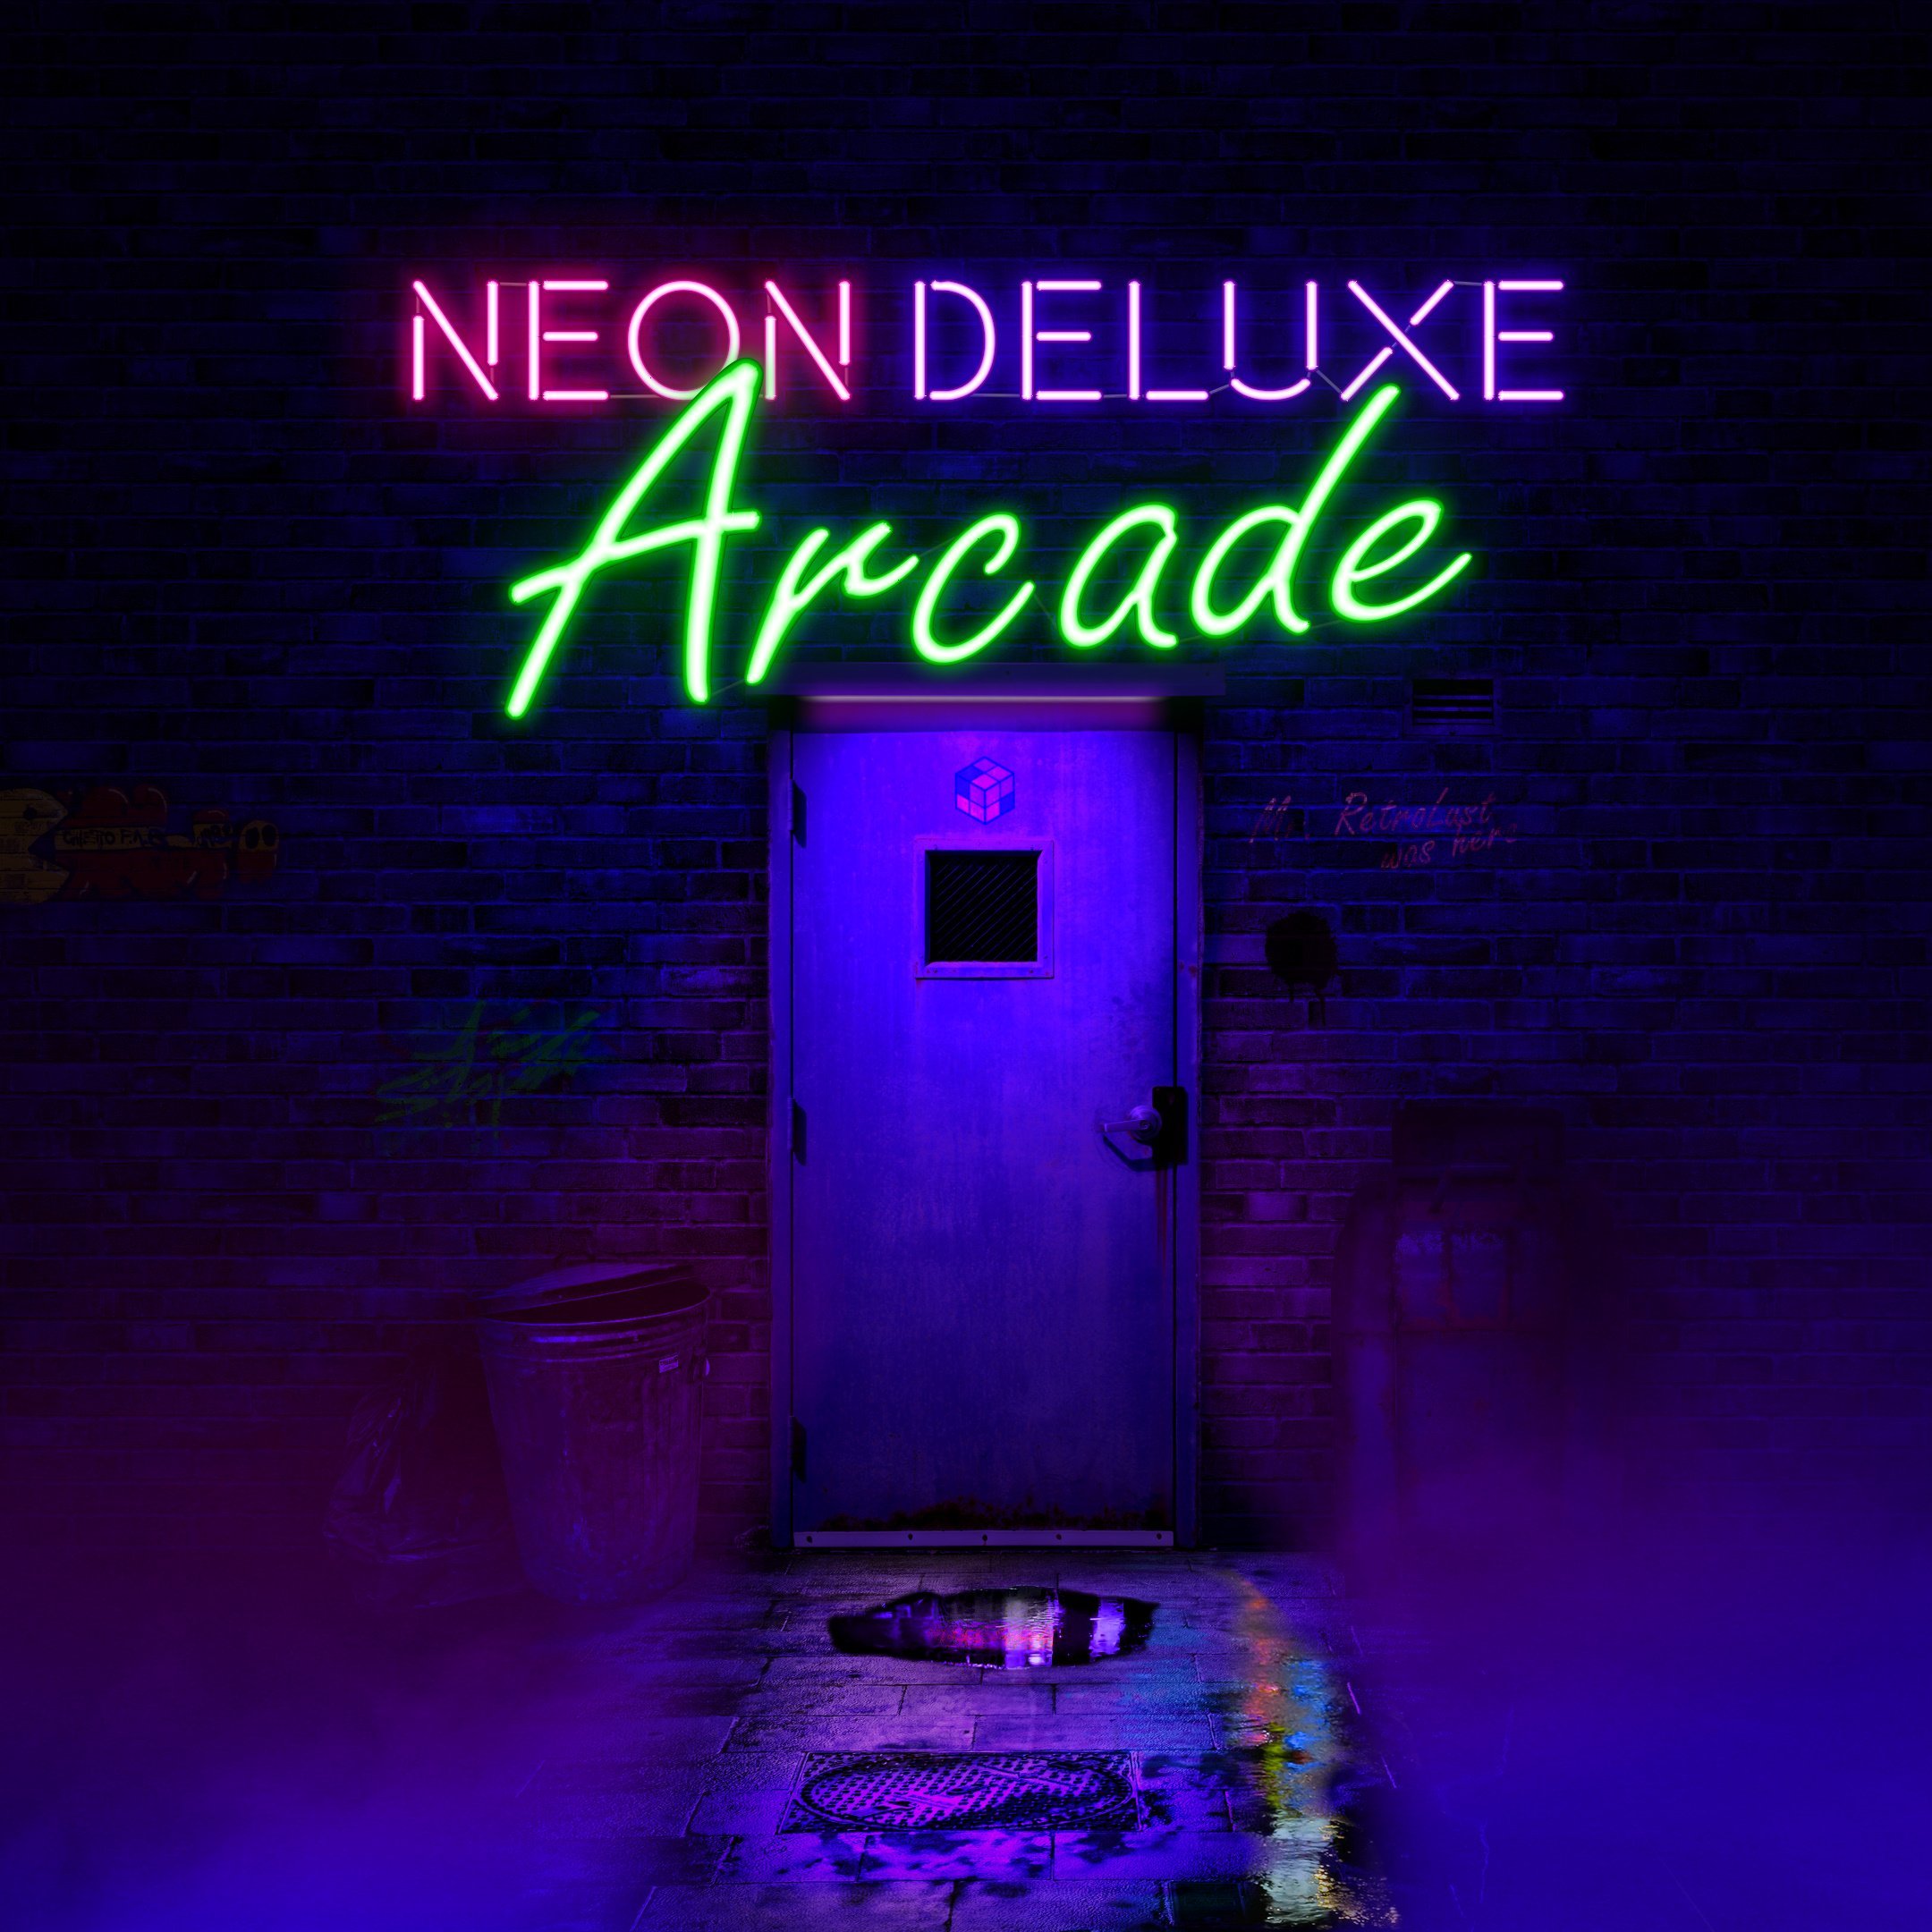 More information about "Neon Deluxe Arcade - 16:9 (Big Box Theme)"